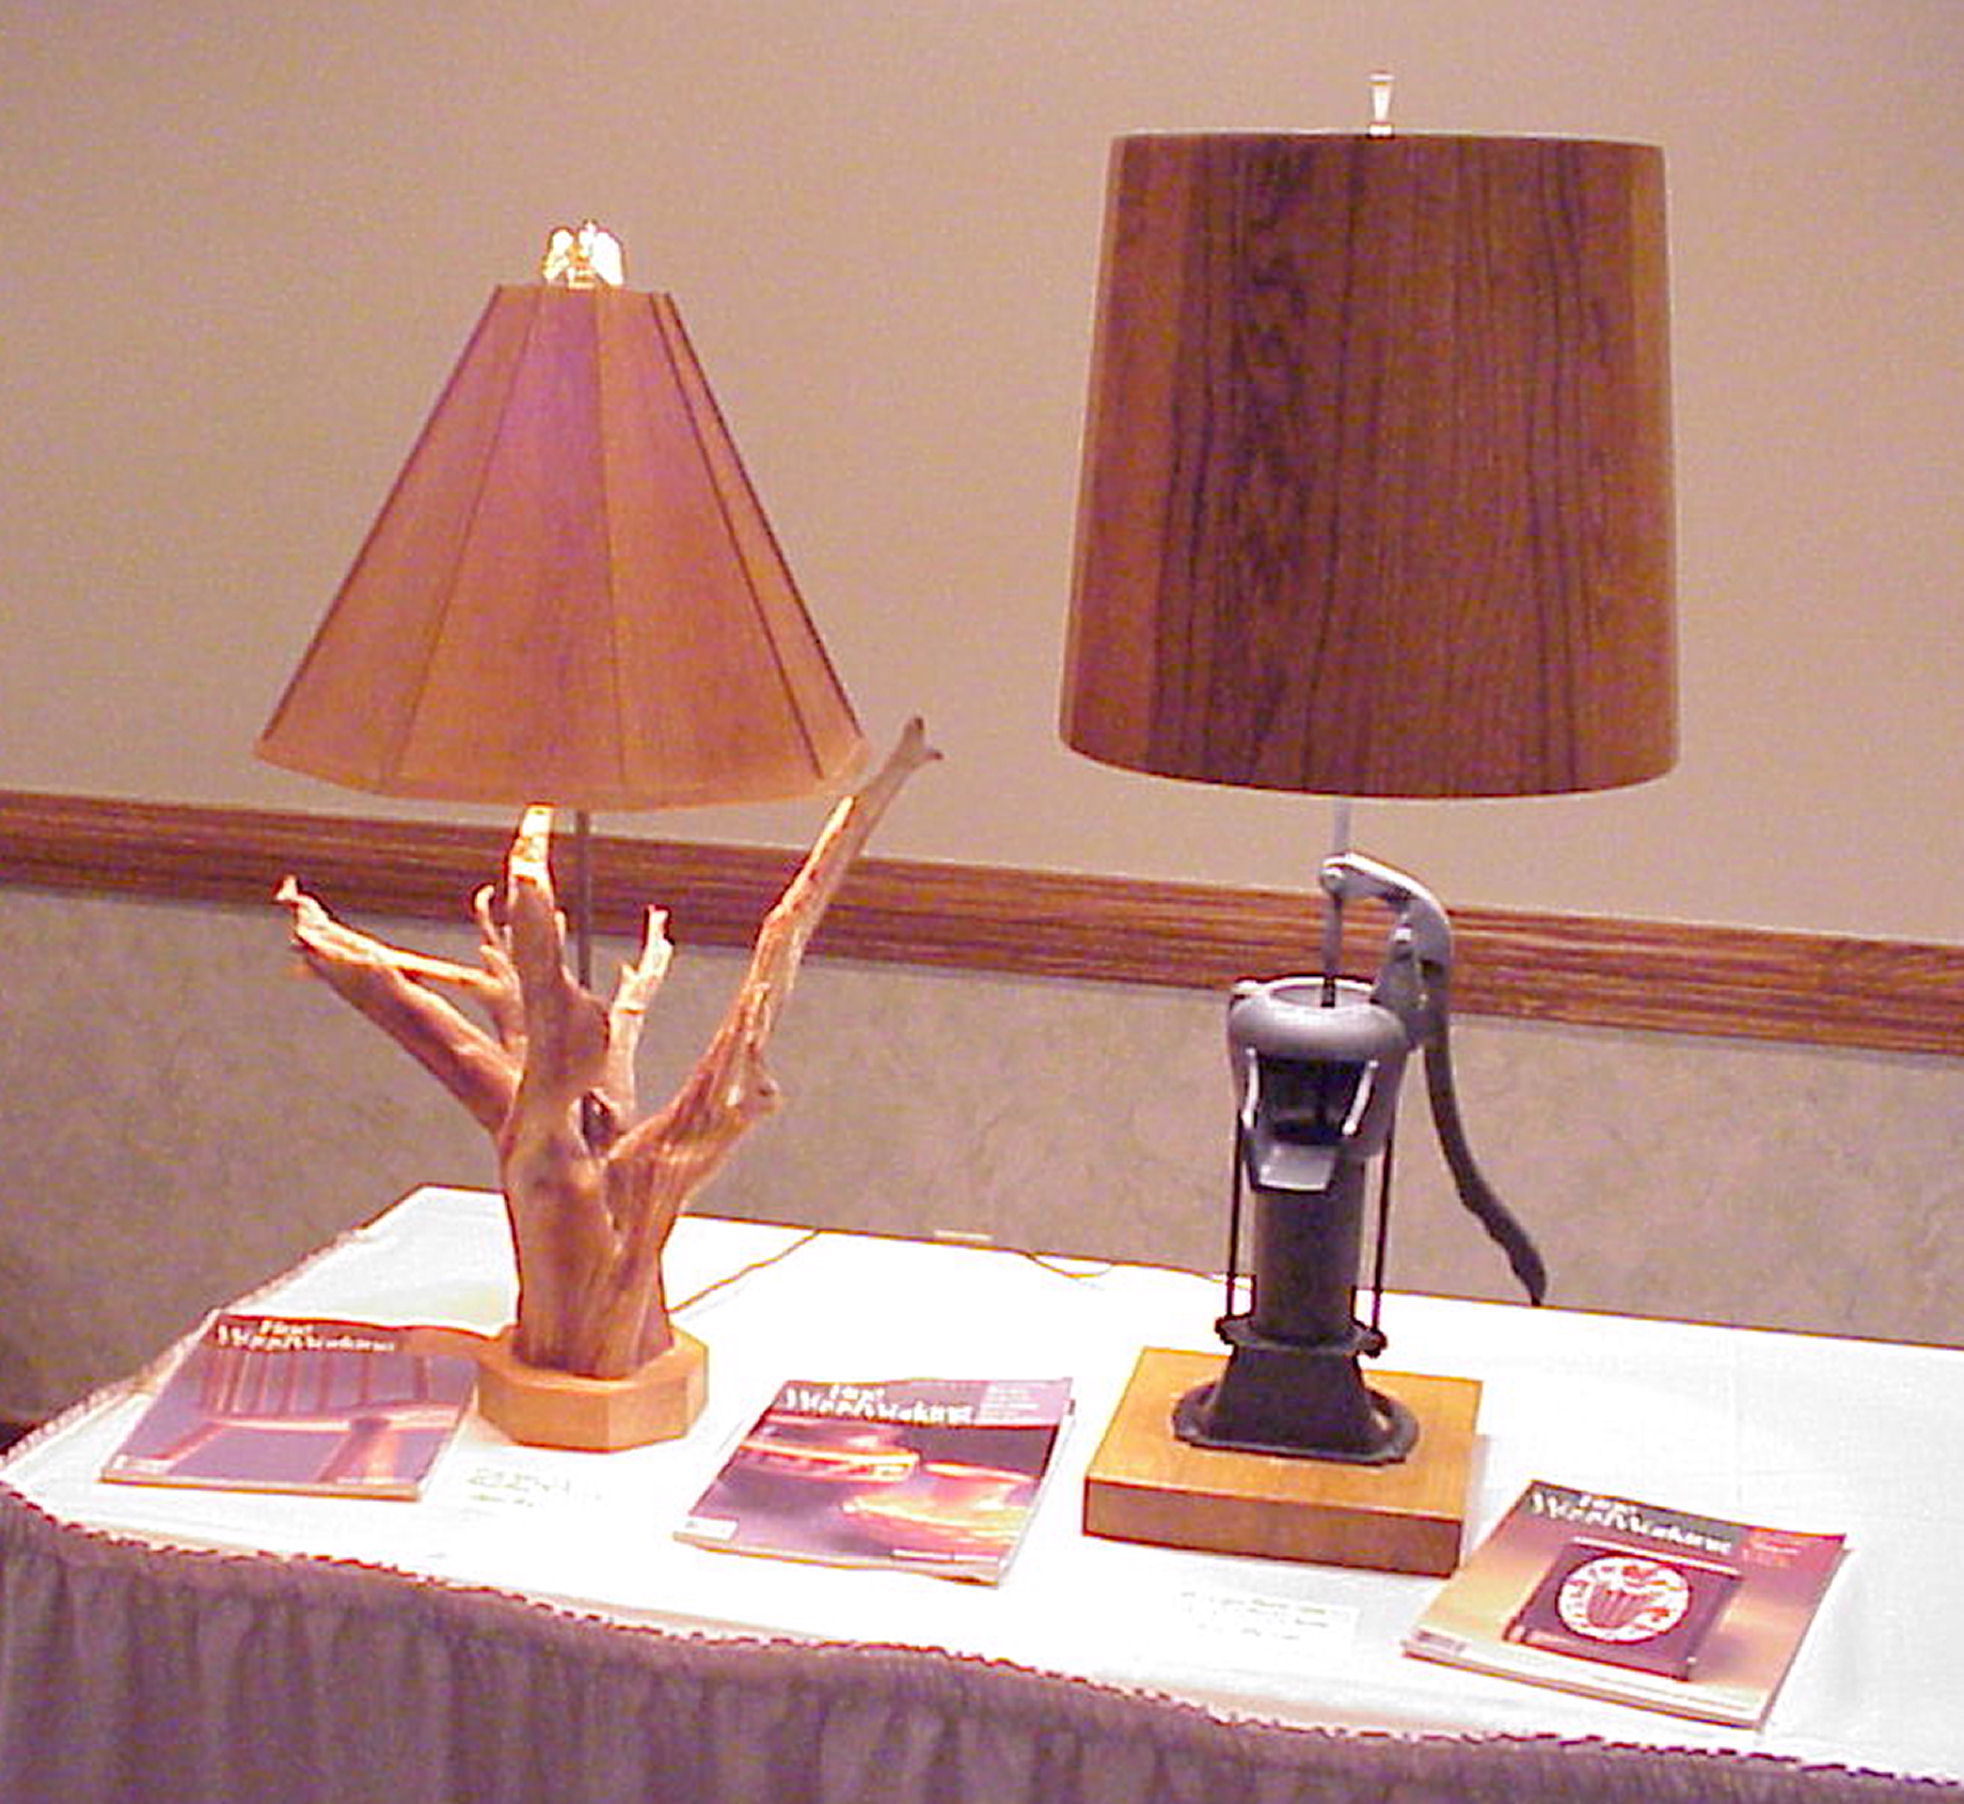 Oak and Pine Table Lamps.  The one with the Pine Shade has a Pine tree root taken from a colonial american farmers fence line.  The one with the Oak Shade has an antique Pitcher Pump as a base. 